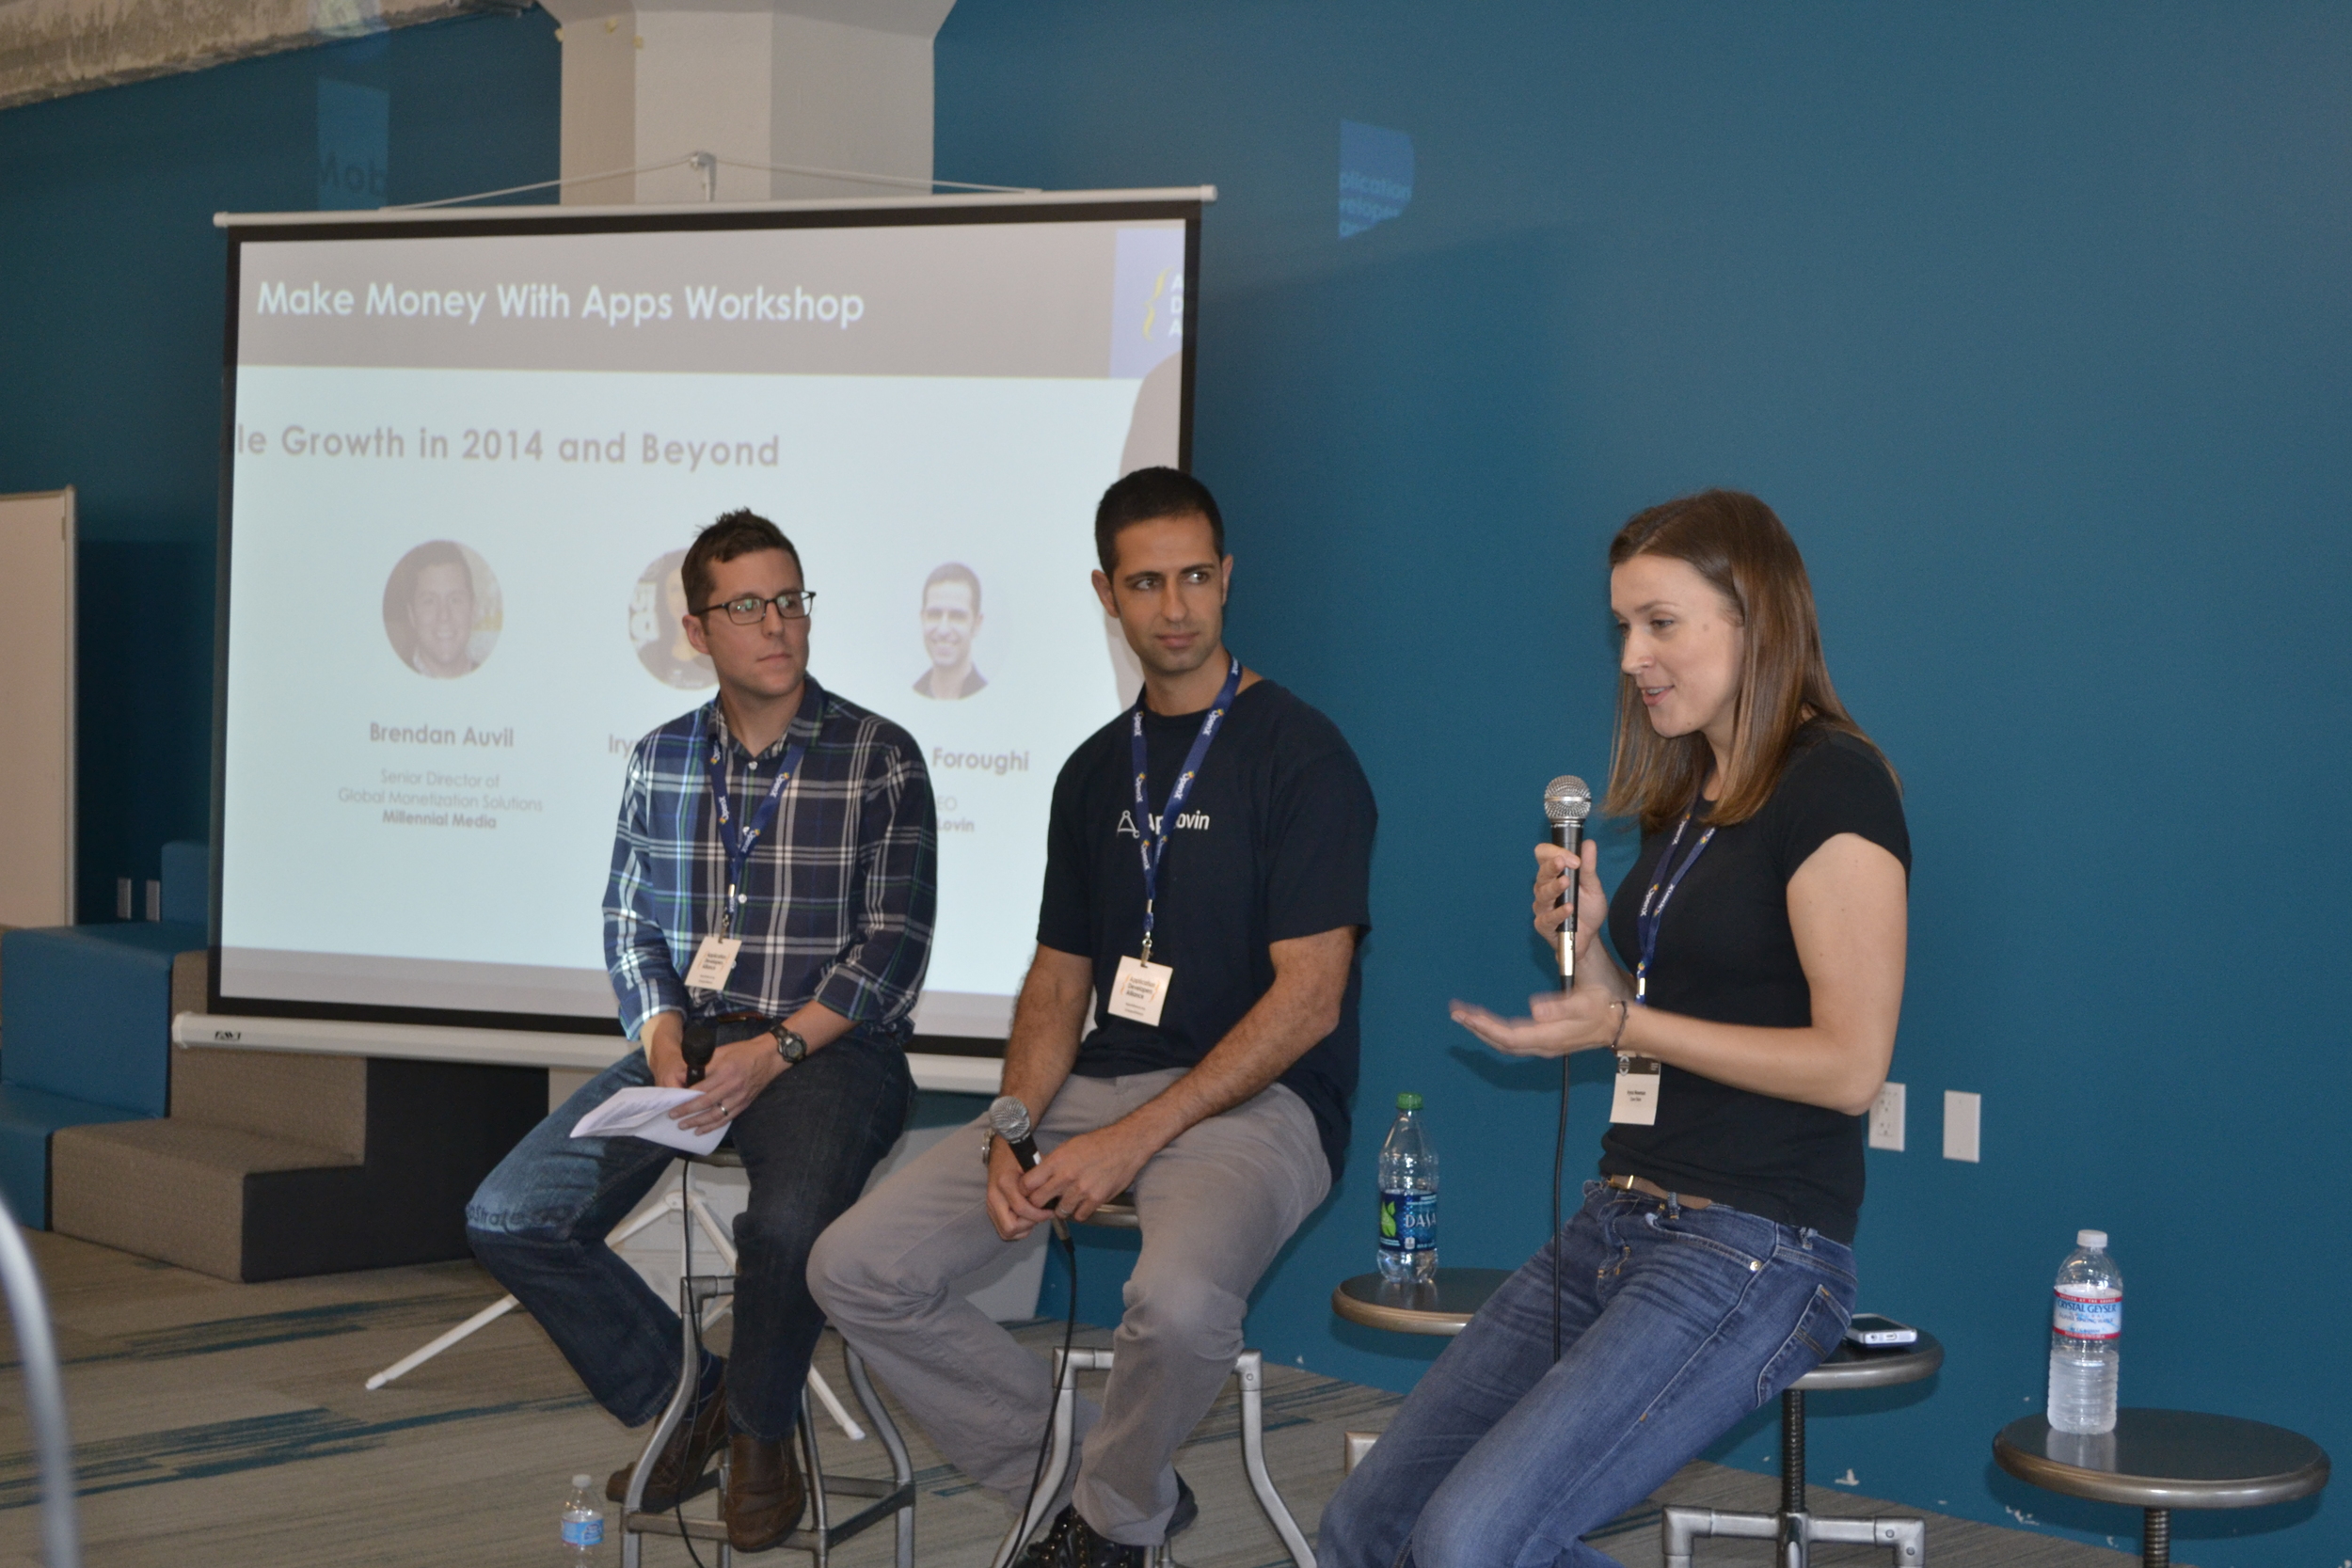 Iryna from OpenTable, Adam from AppLovin, and Brendan from Millennial Media discuss mobile growth in 2014.